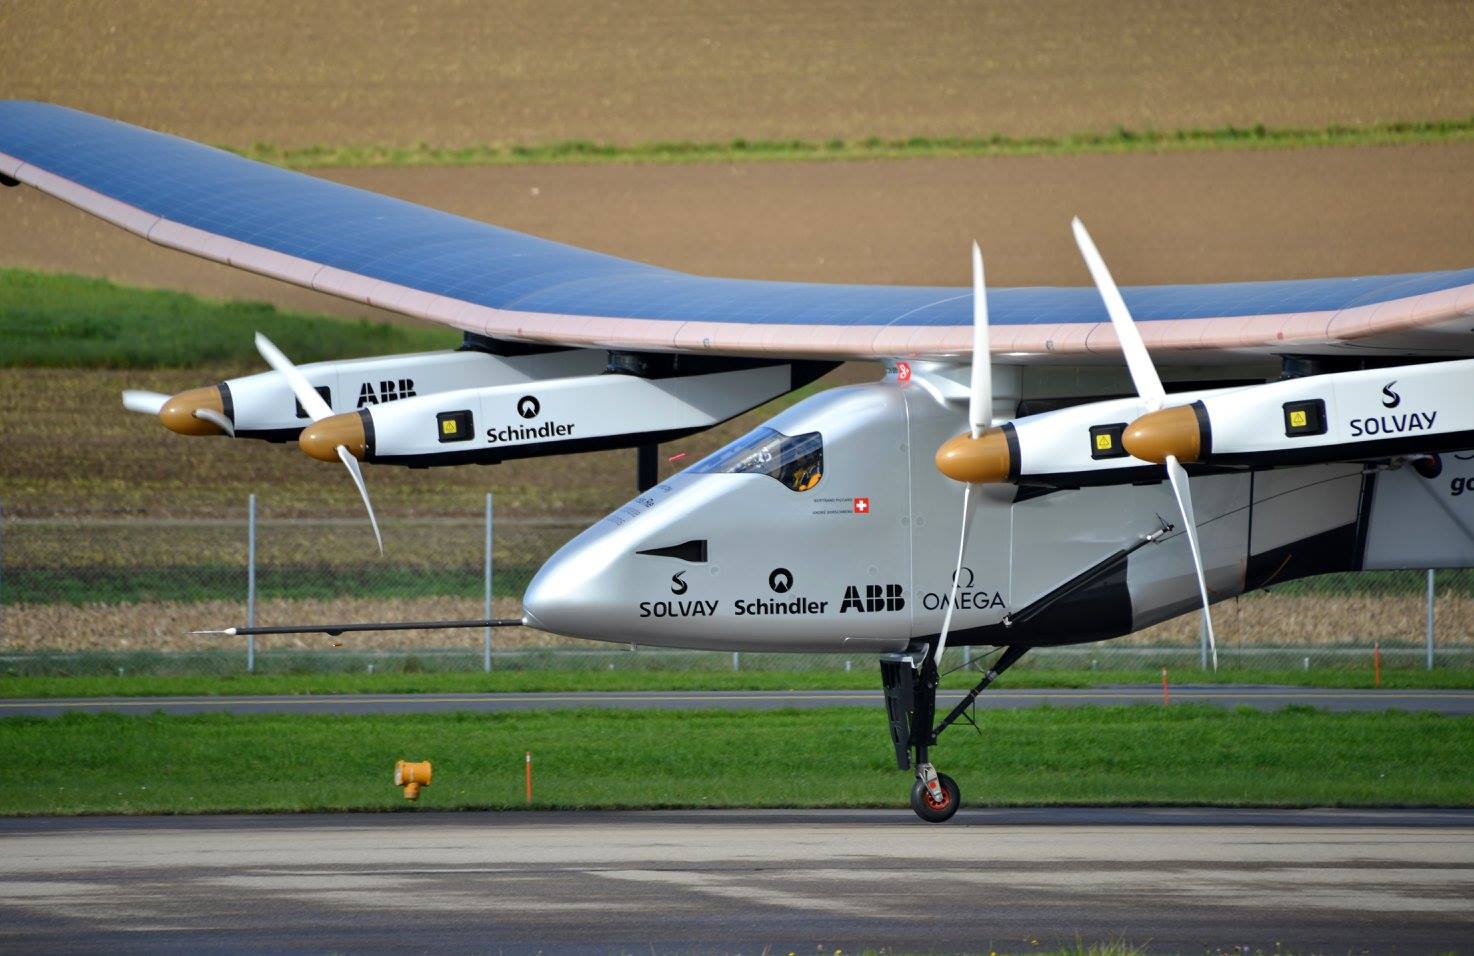 Investors respond better to the profit potential of green innovations such as solar-powered planes rather than their eco-credentials, according to Dr Bertrand Piccard, founder of Solar Impulse.